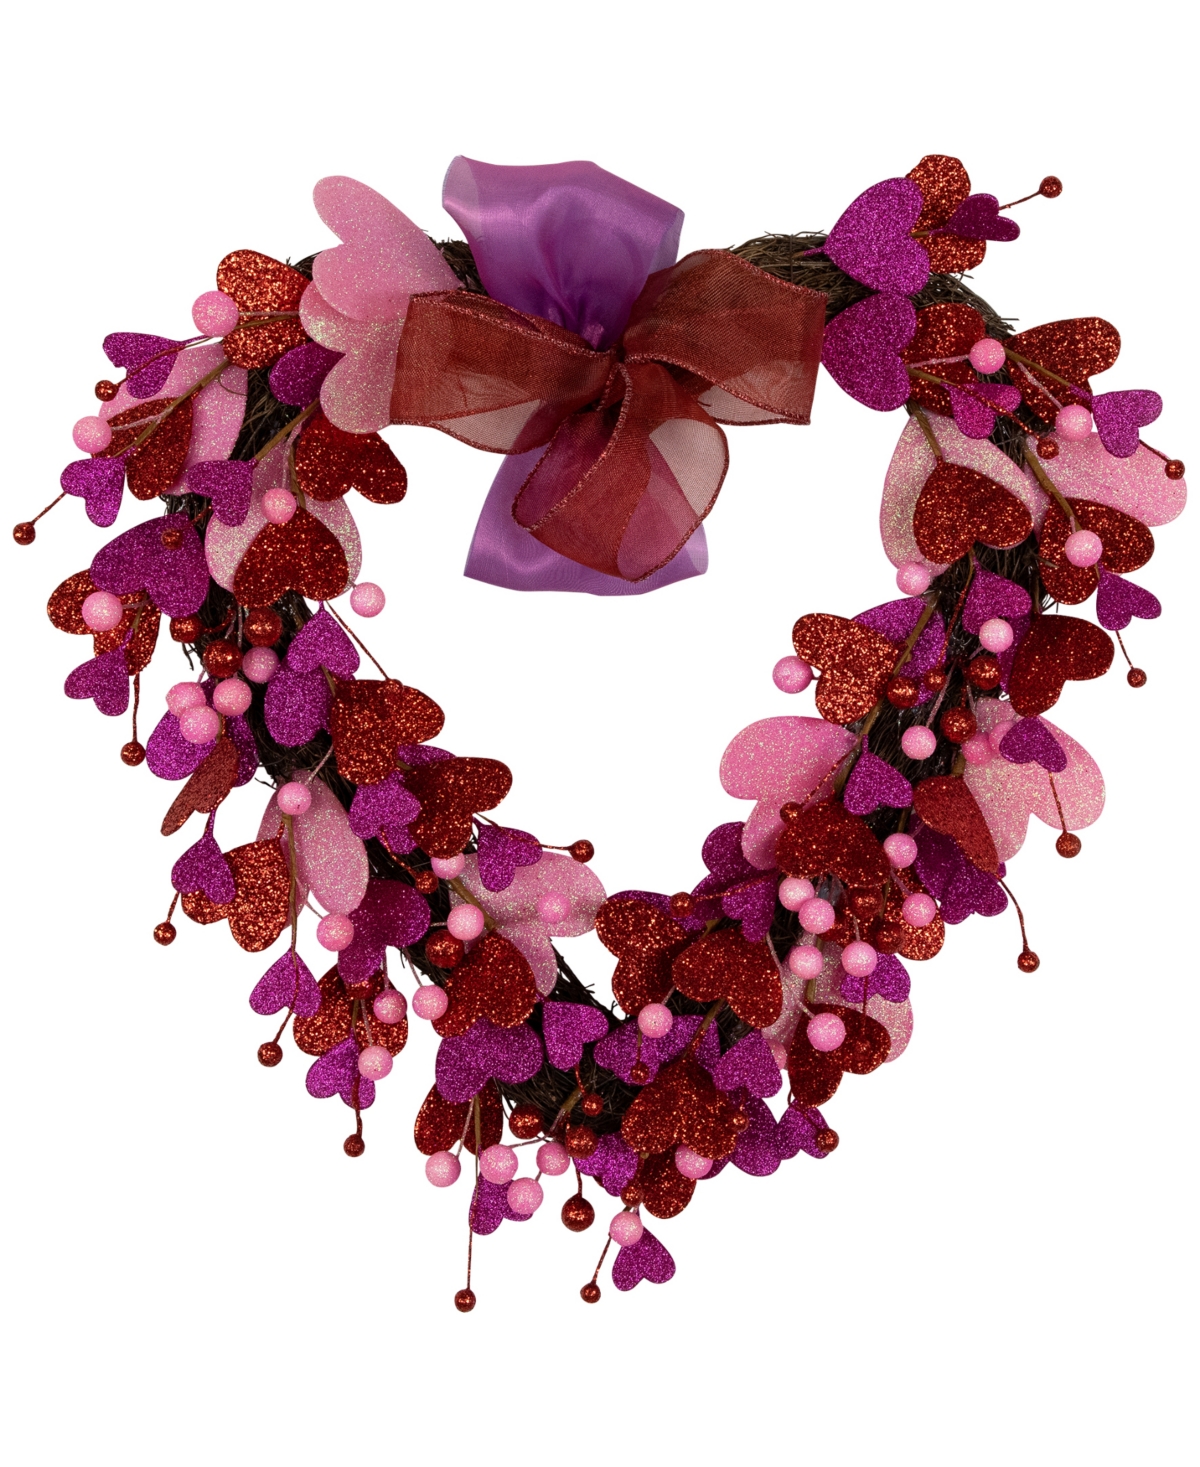 Northlight Hearts With Berries Valentine's Day Wreath, 20" In Pink